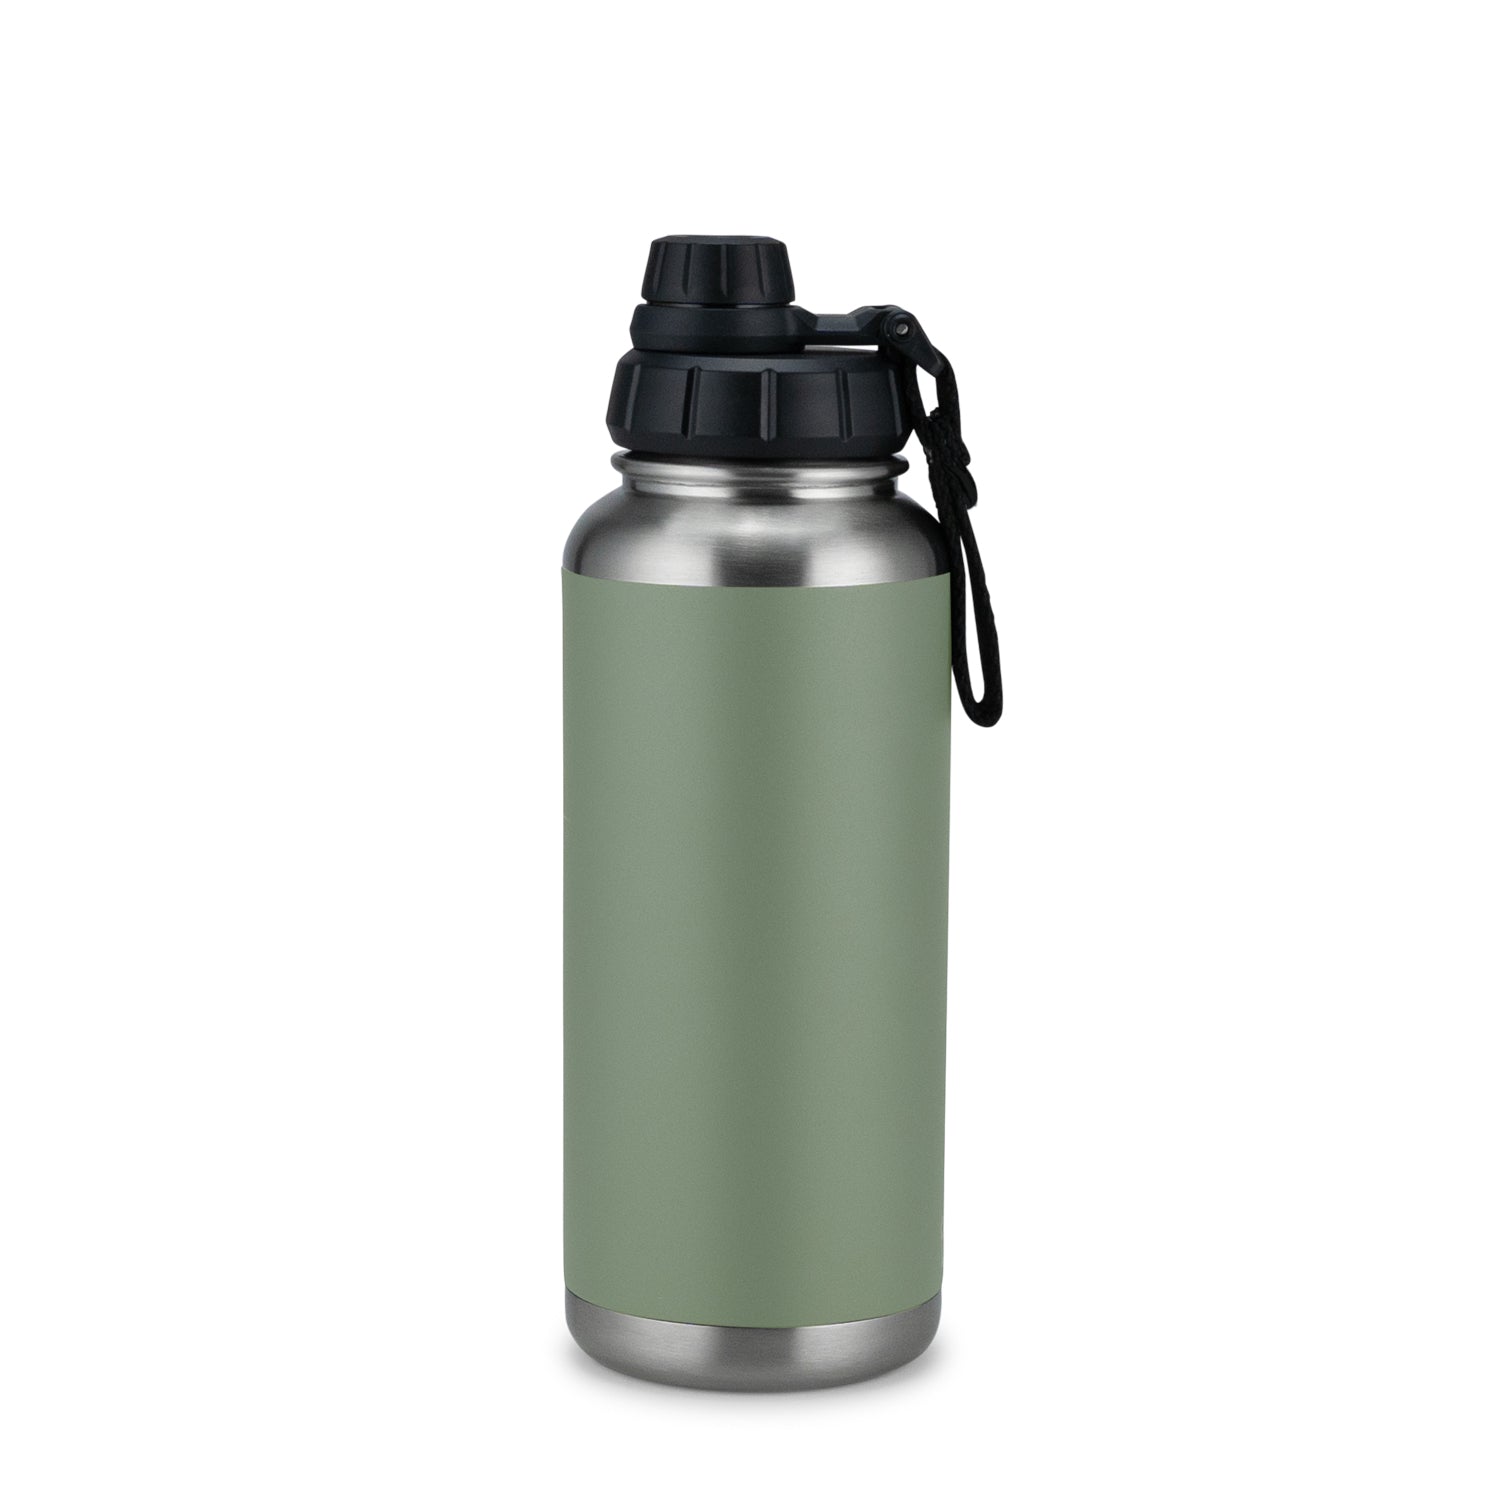 Campo Libre drinking bottle UMBERTO (950ml)